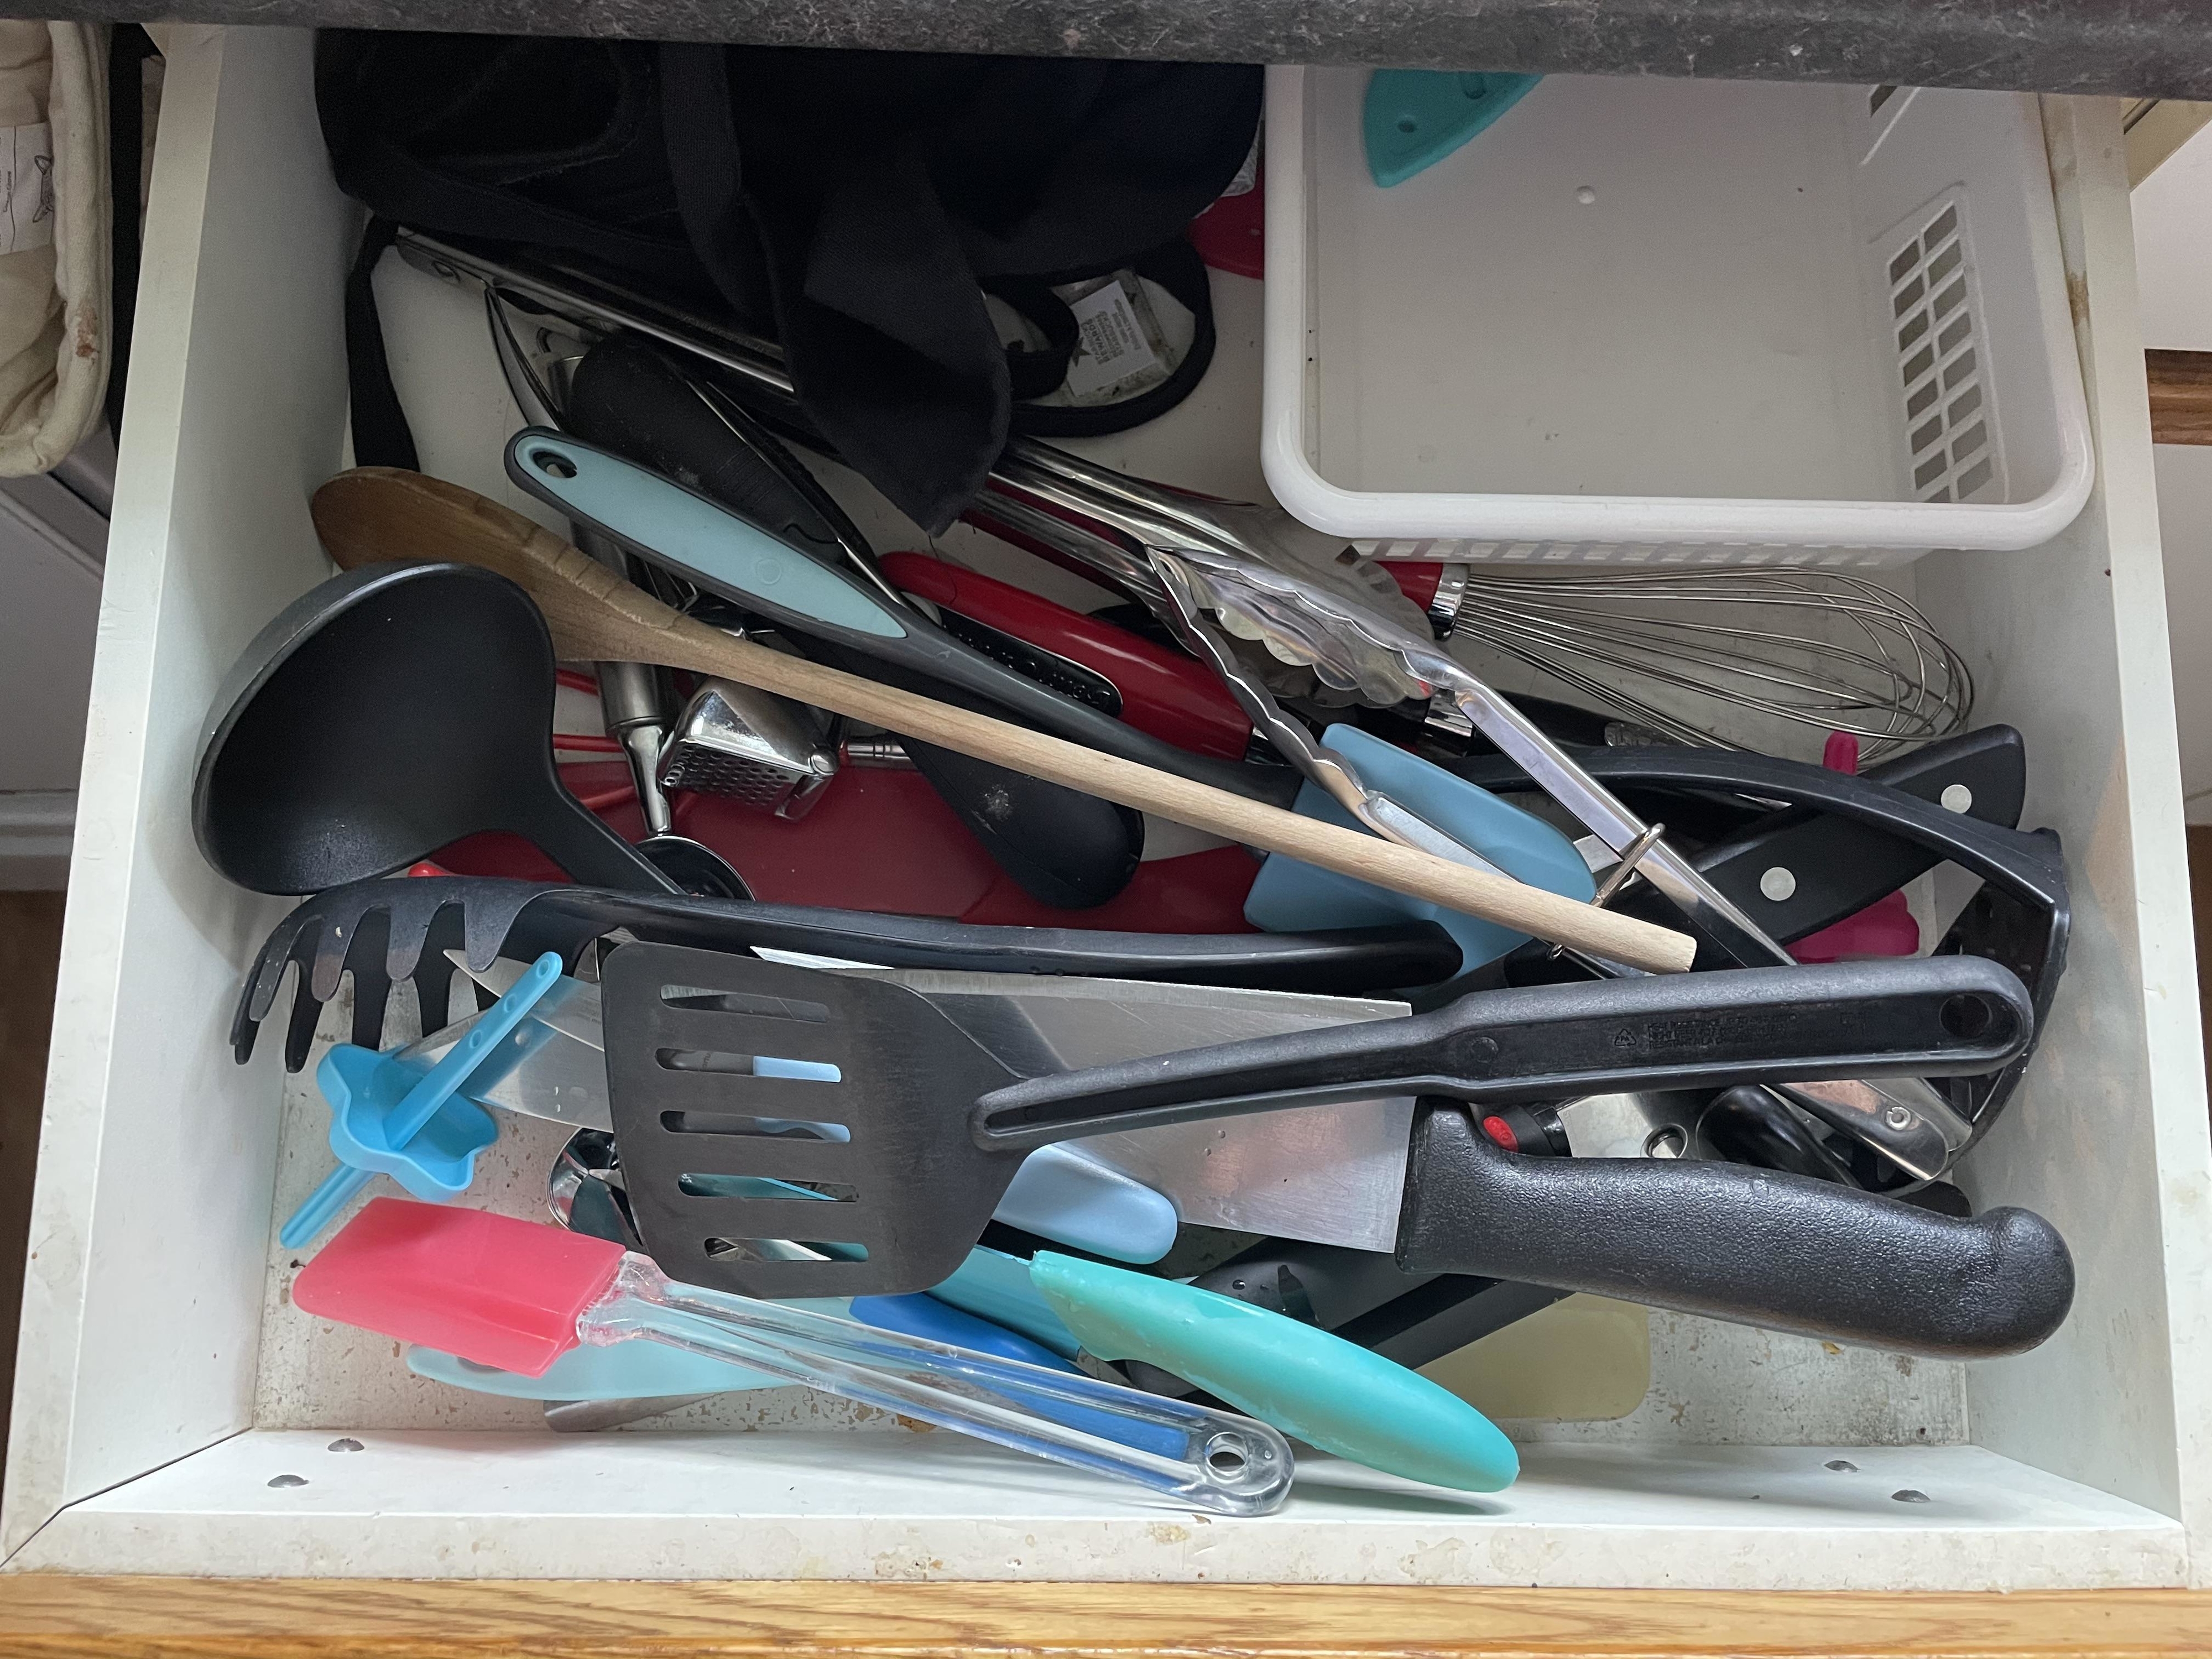 Assorted kitchen utensils in a cluttered drawer, including spatulas and whisks